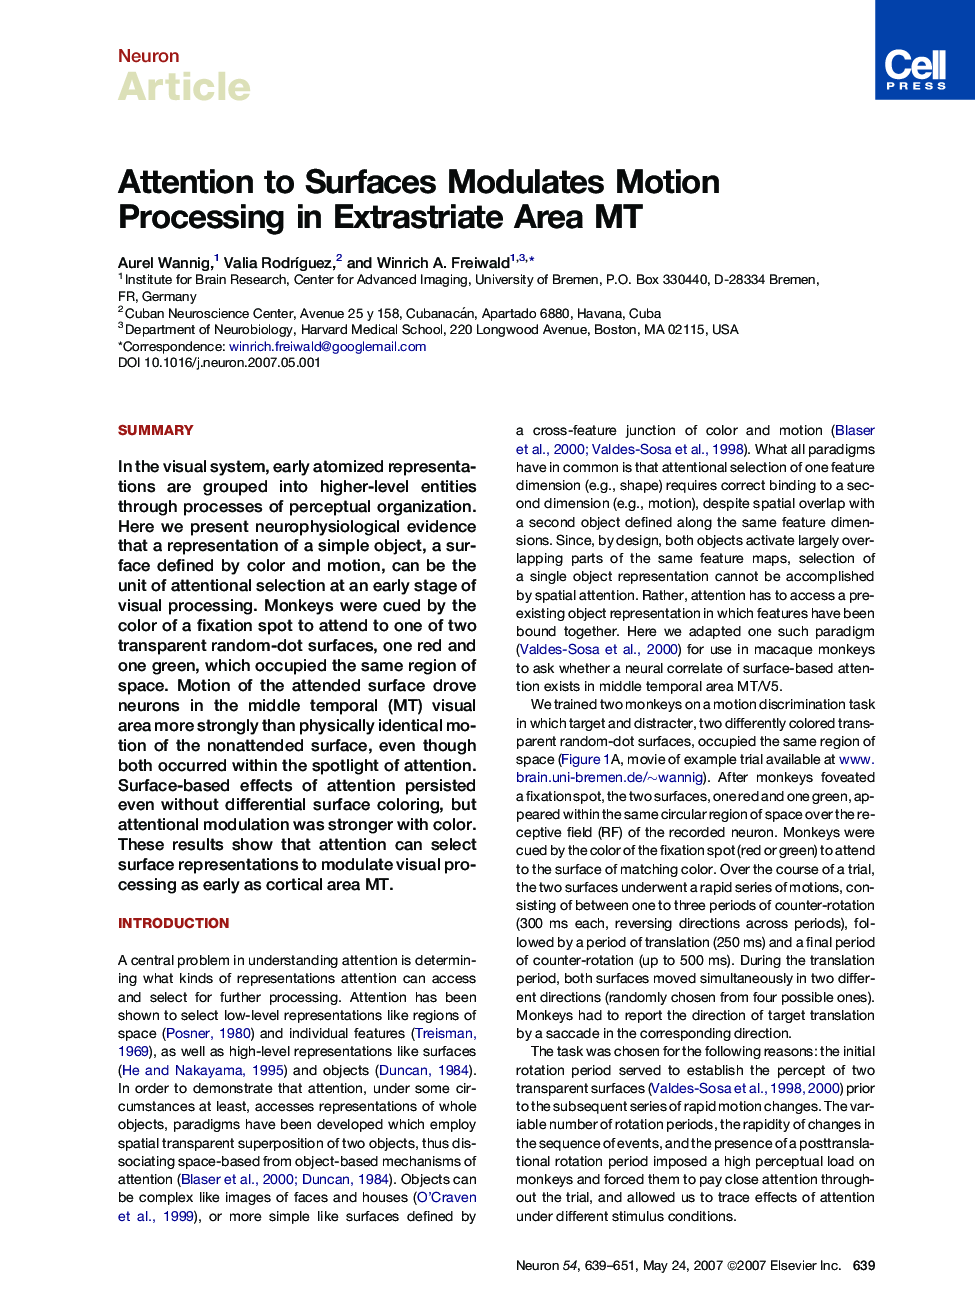 Attention to Surfaces Modulates Motion Processing in Extrastriate Area MT